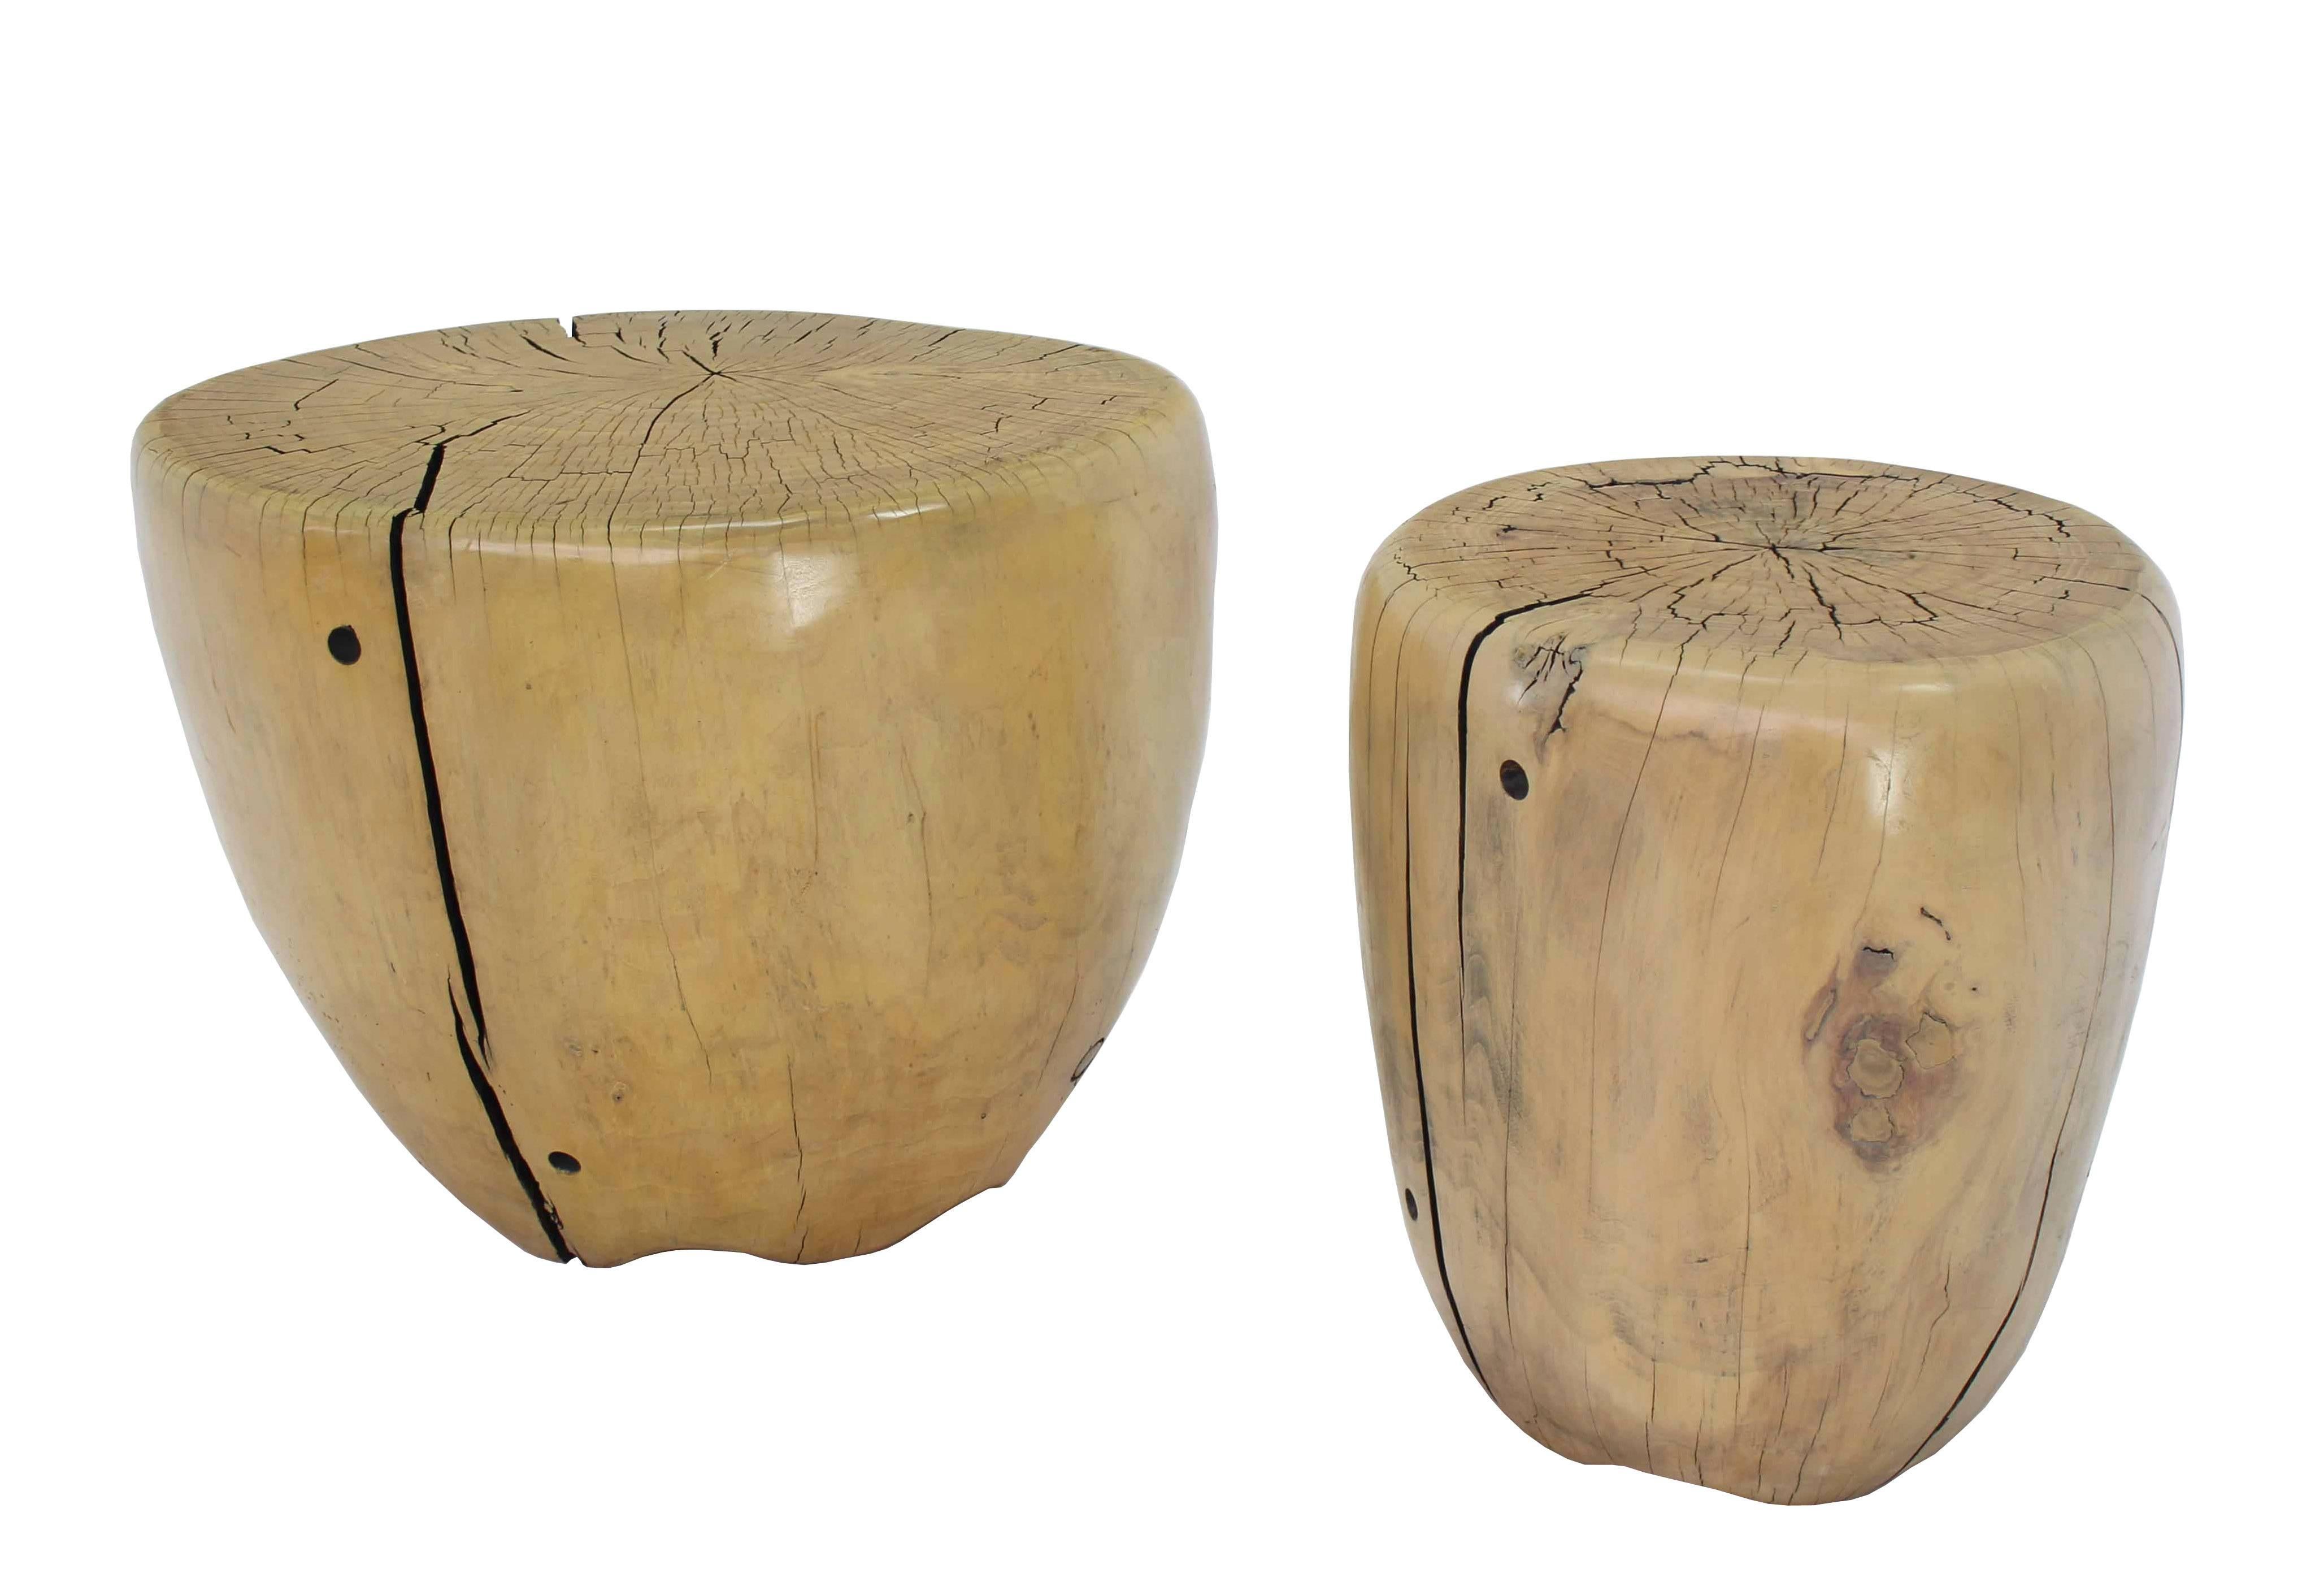 Pair of nice petrofied wood logs end or side tables short pedestals, 19 x 19 x 21 second pedestal.